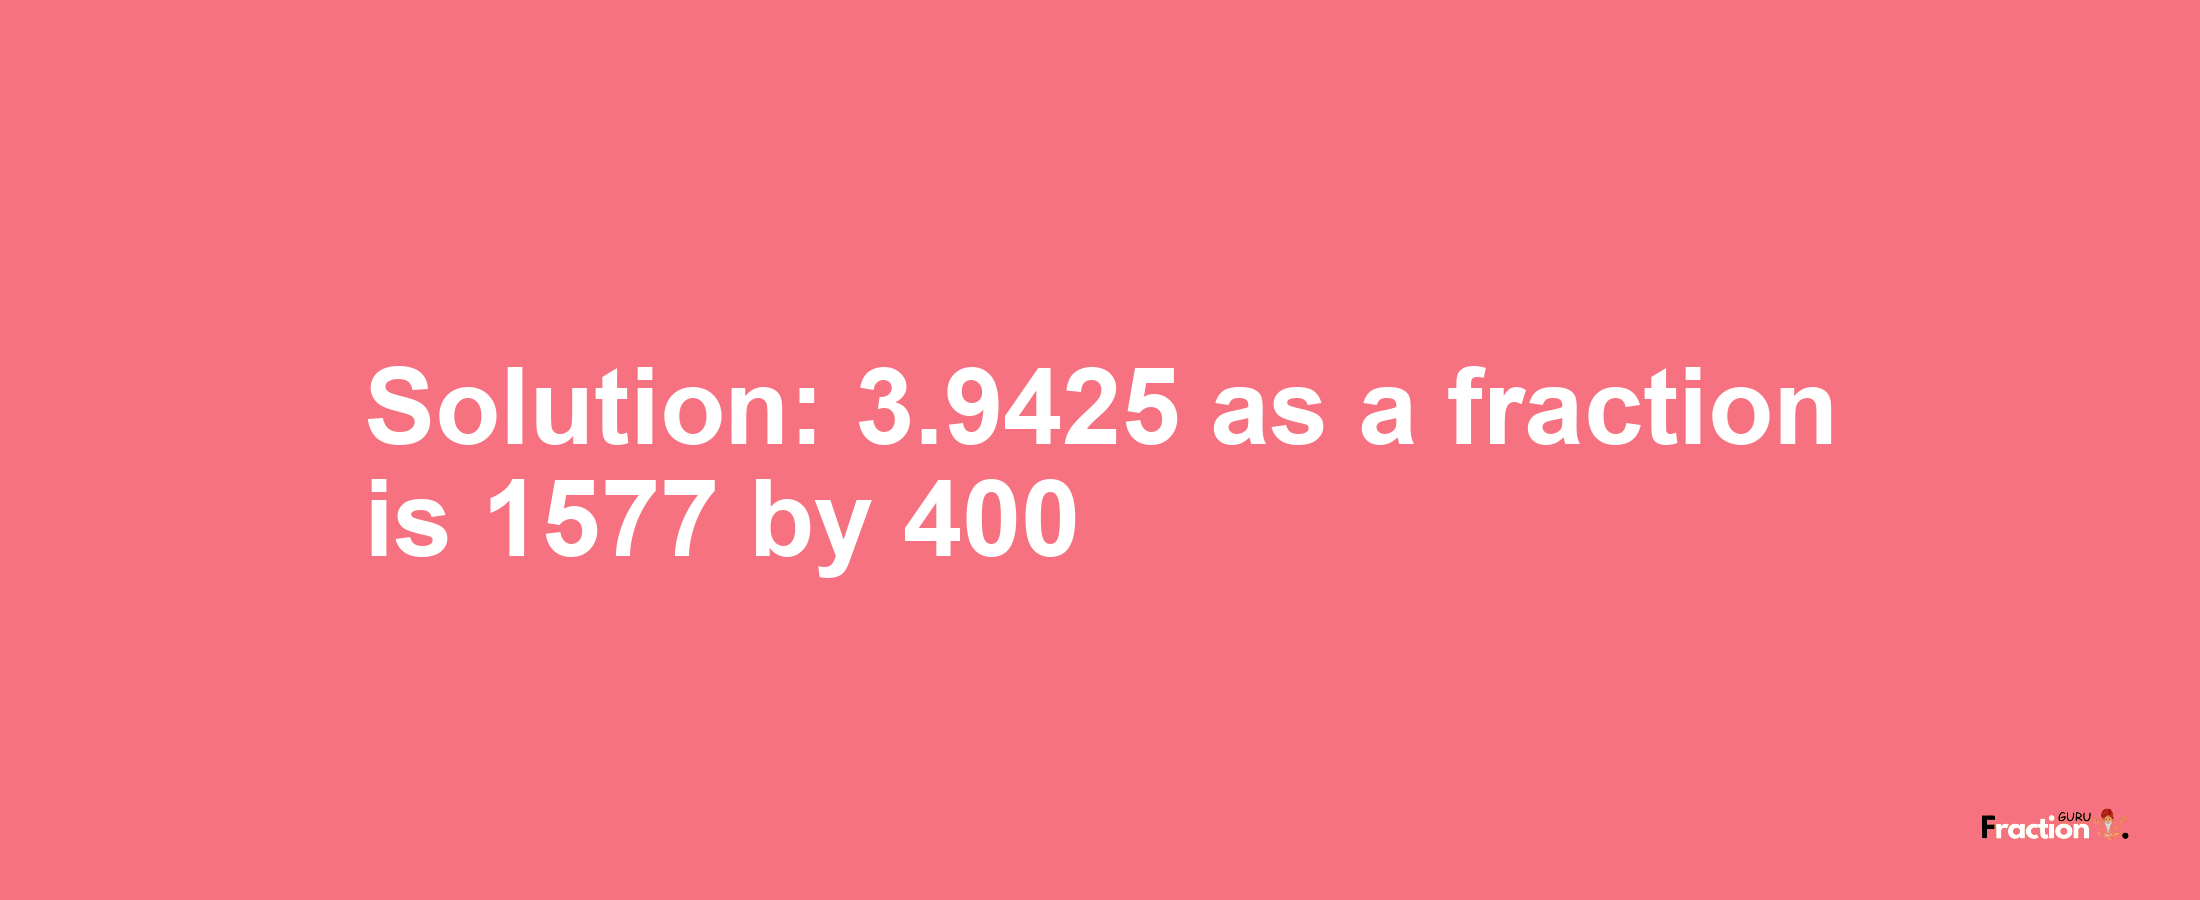 Solution:3.9425 as a fraction is 1577/400